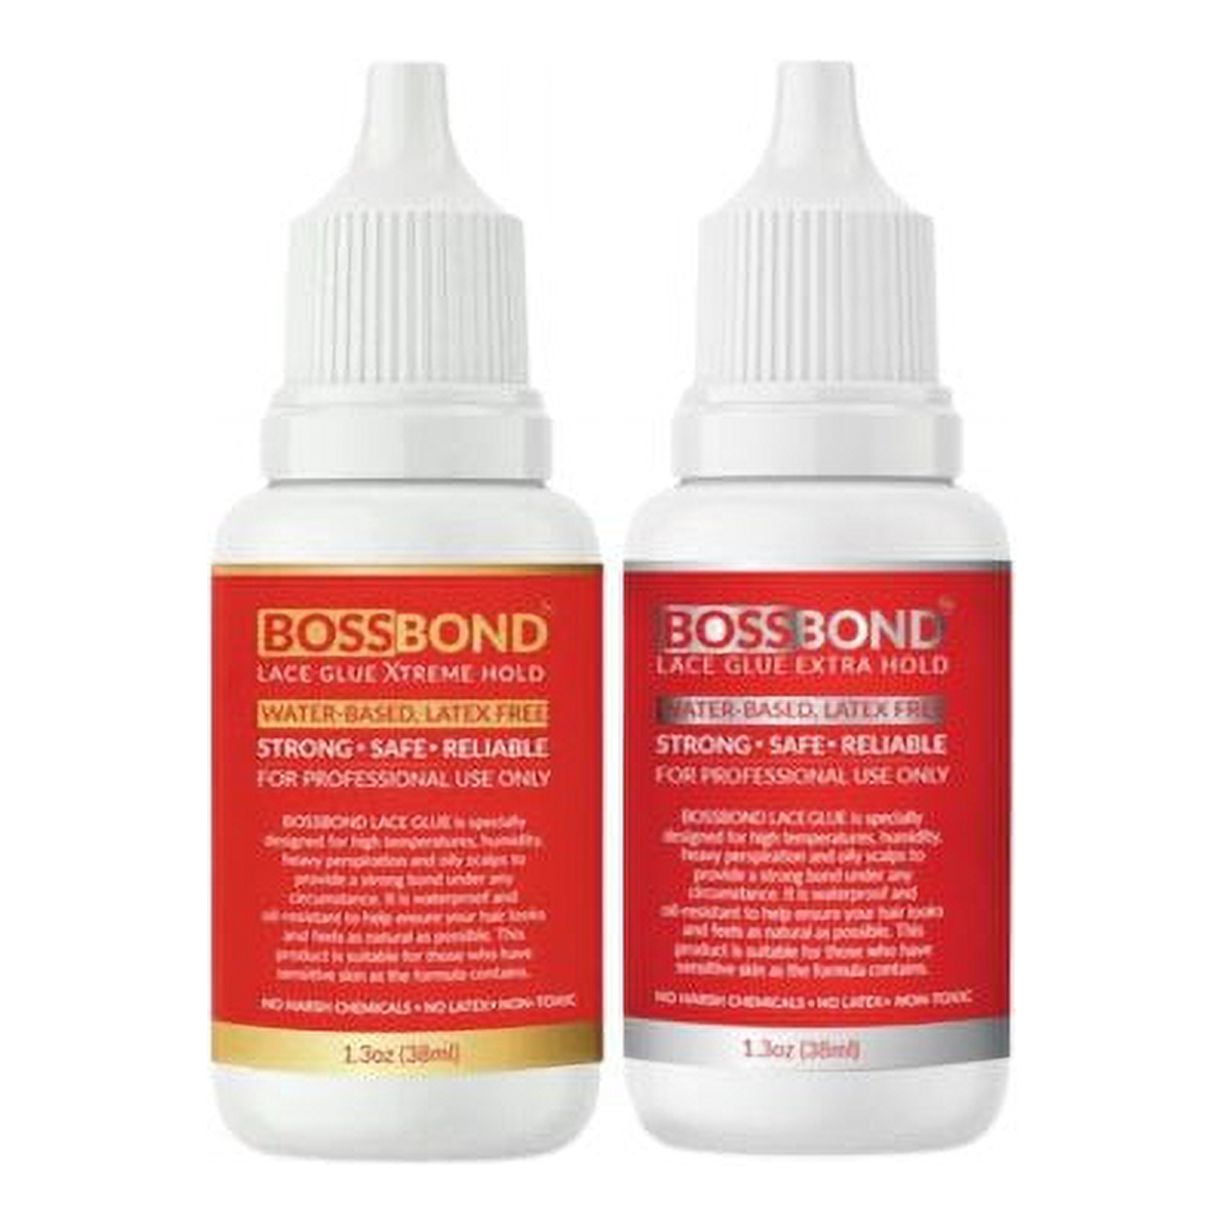 GHOSTBOND XL Hair Replacement Adhesive - 1.3oz - Invisible Bonding Wig  Glue: Extra Moisture Control - Water & Oil-Resistant, Light Hold for Poly  and